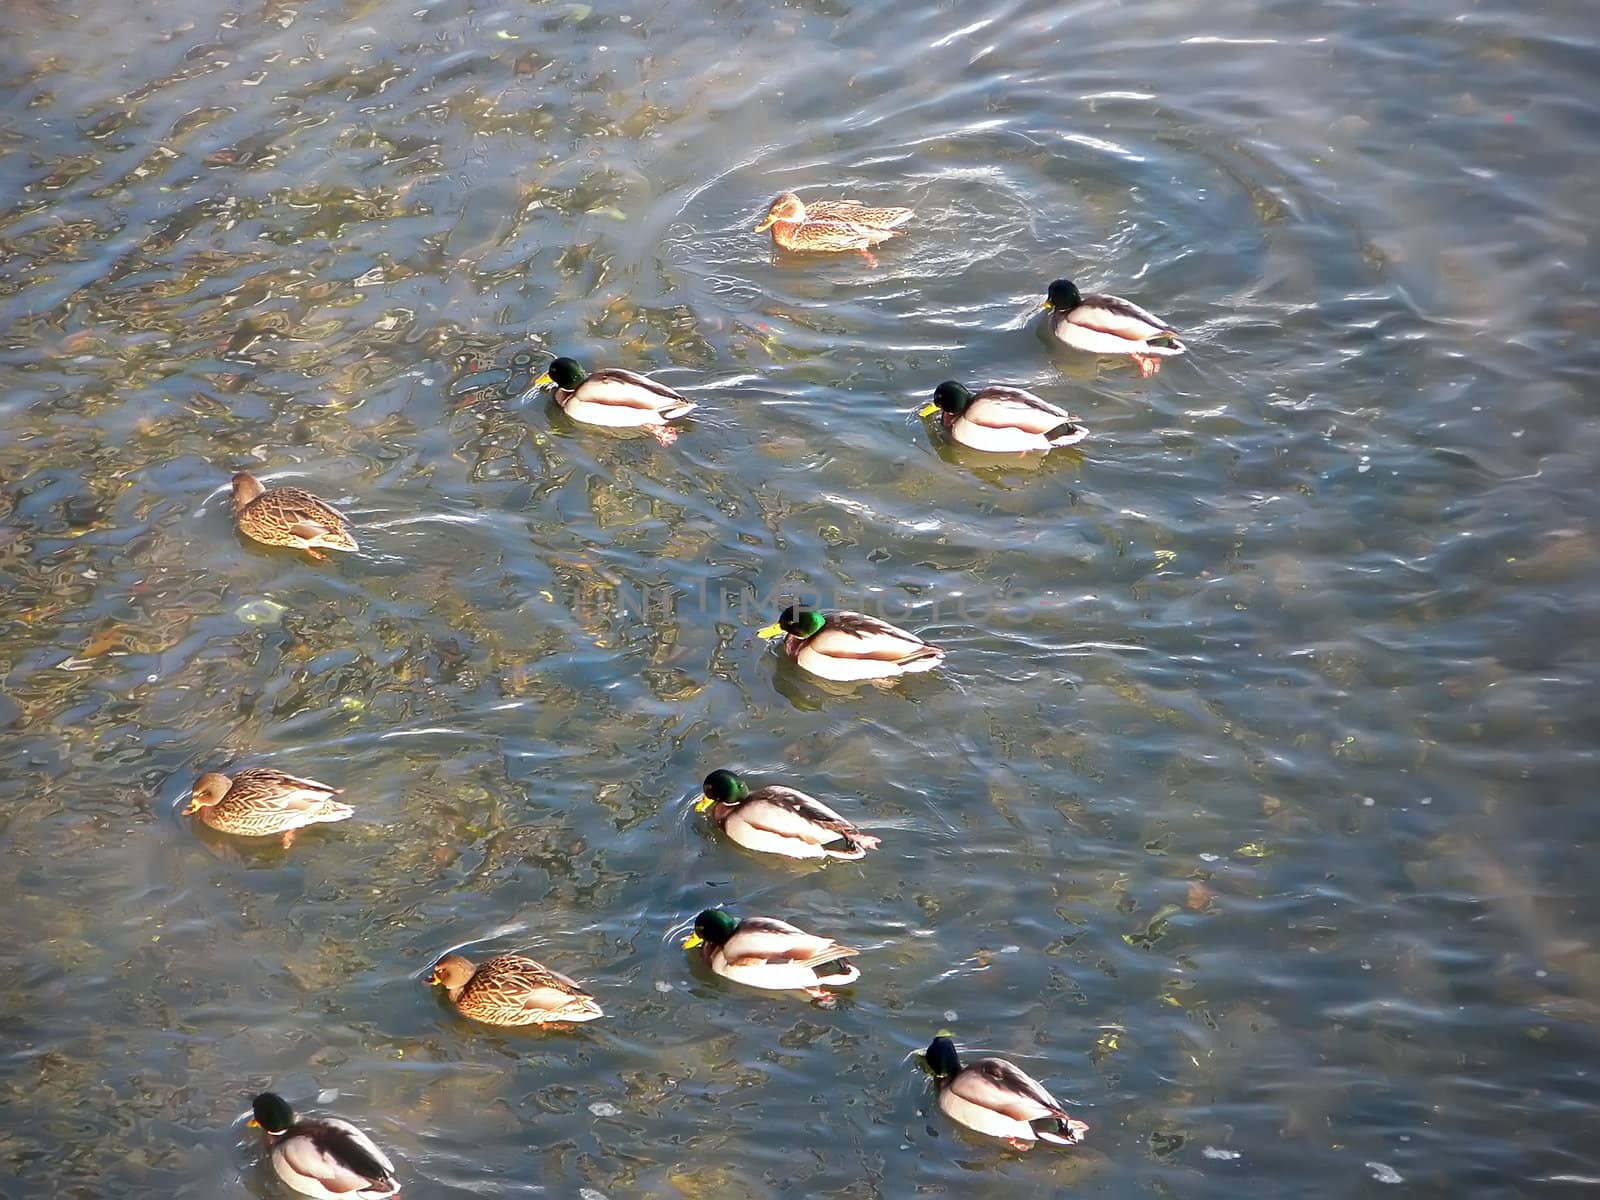 Group of wild ducks swimming in the river by qiiip